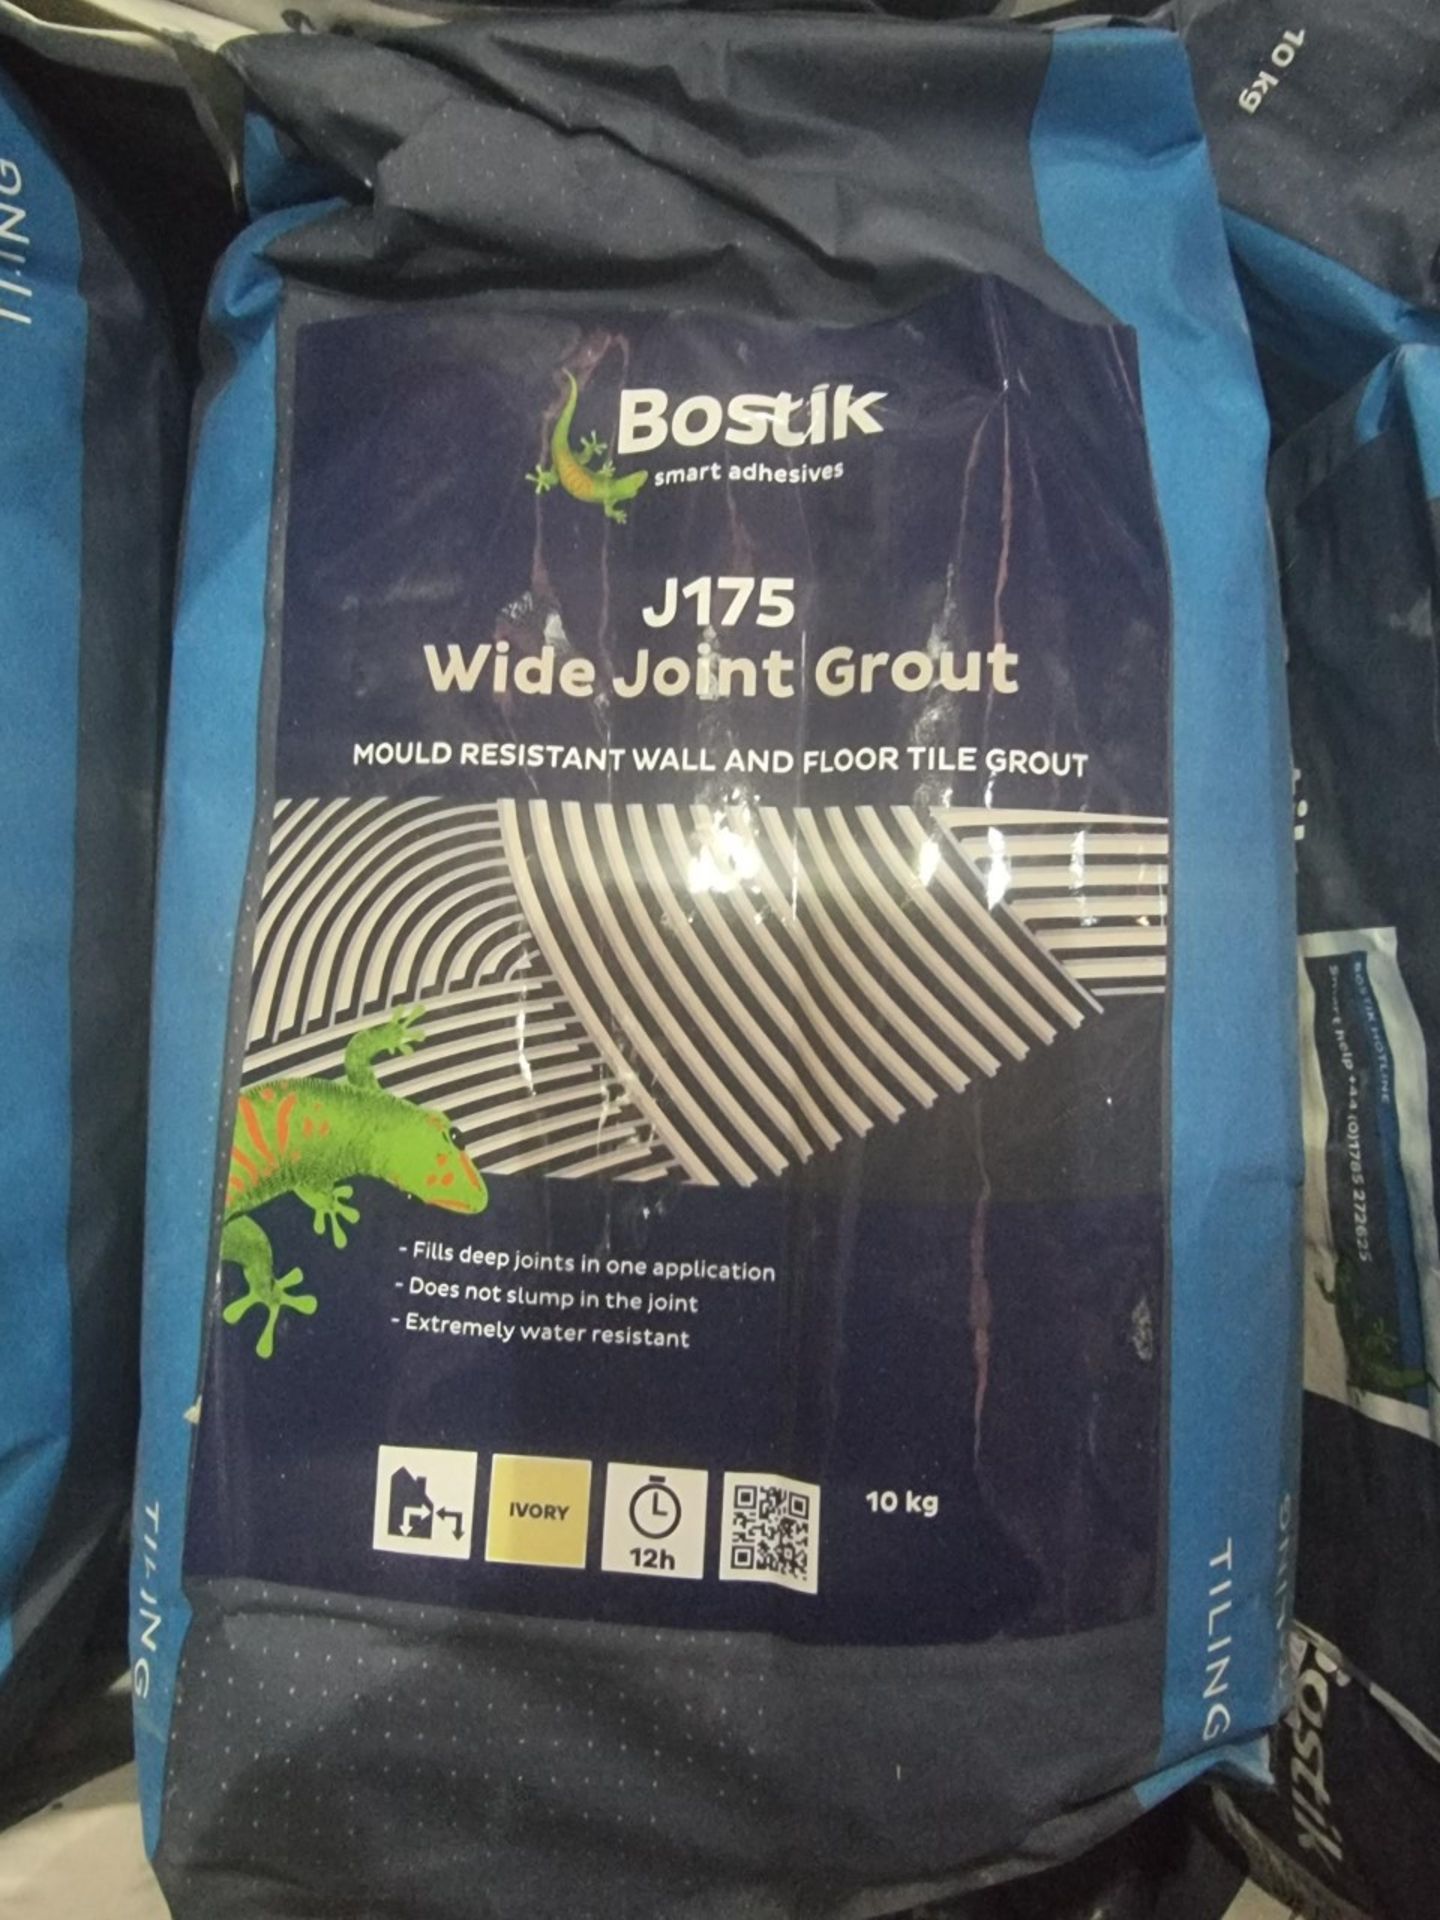 (B141) PALLET TO CONTAIN 98 x 10KG BAGS OF BOSTIK J175 WIDE JOINT MOULD RESISTANT WALL AND FLOOR